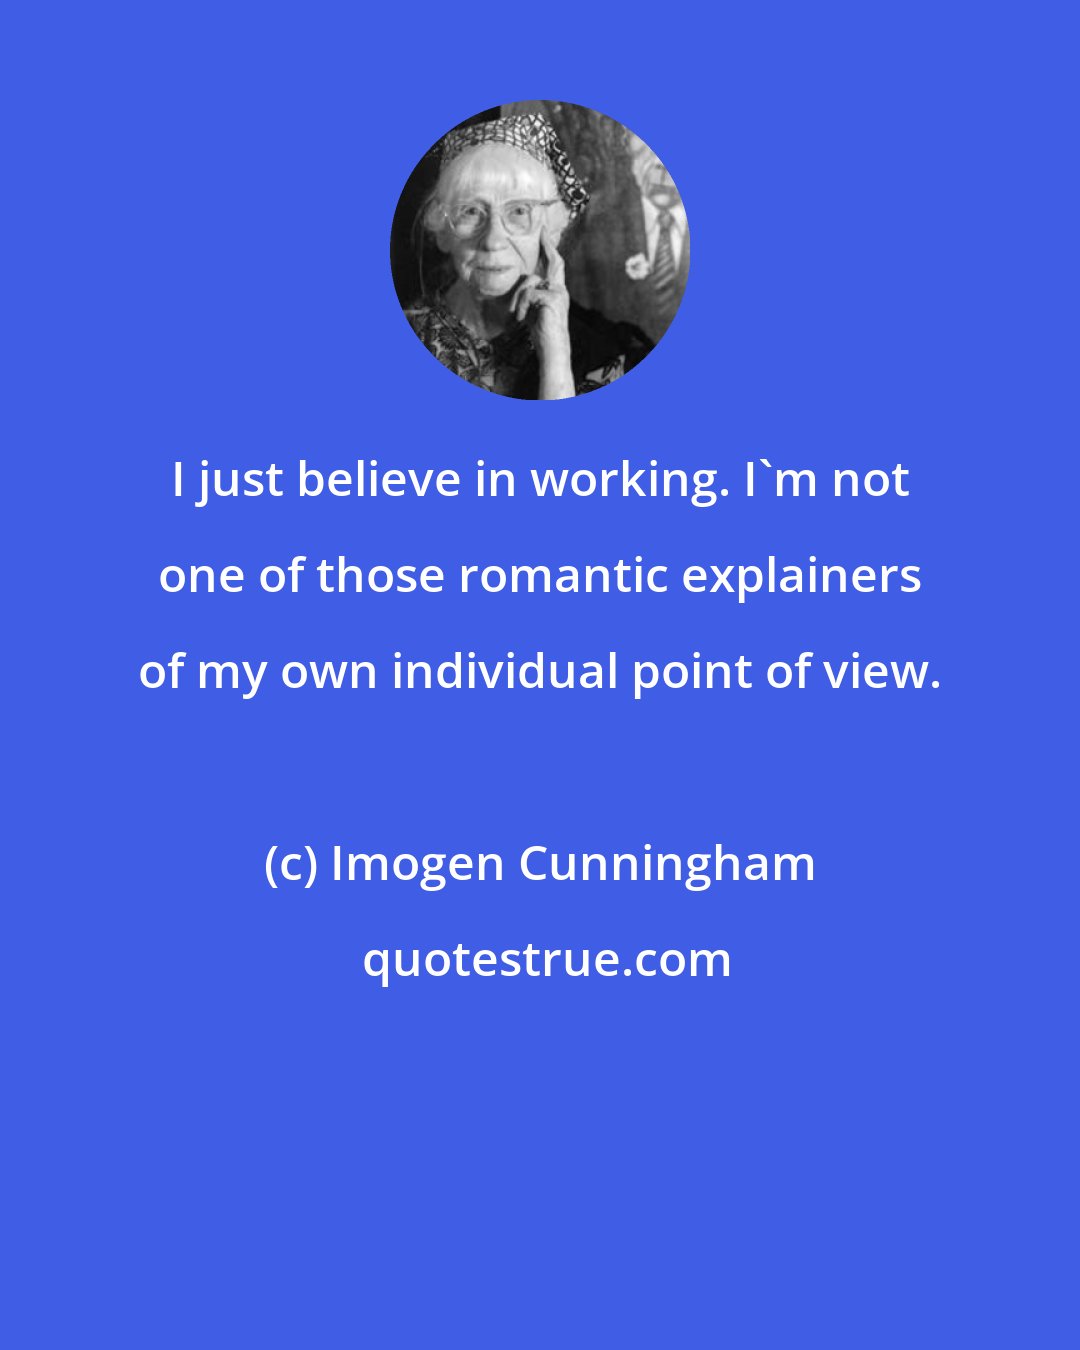 Imogen Cunningham: I just believe in working. I'm not one of those romantic explainers of my own individual point of view.